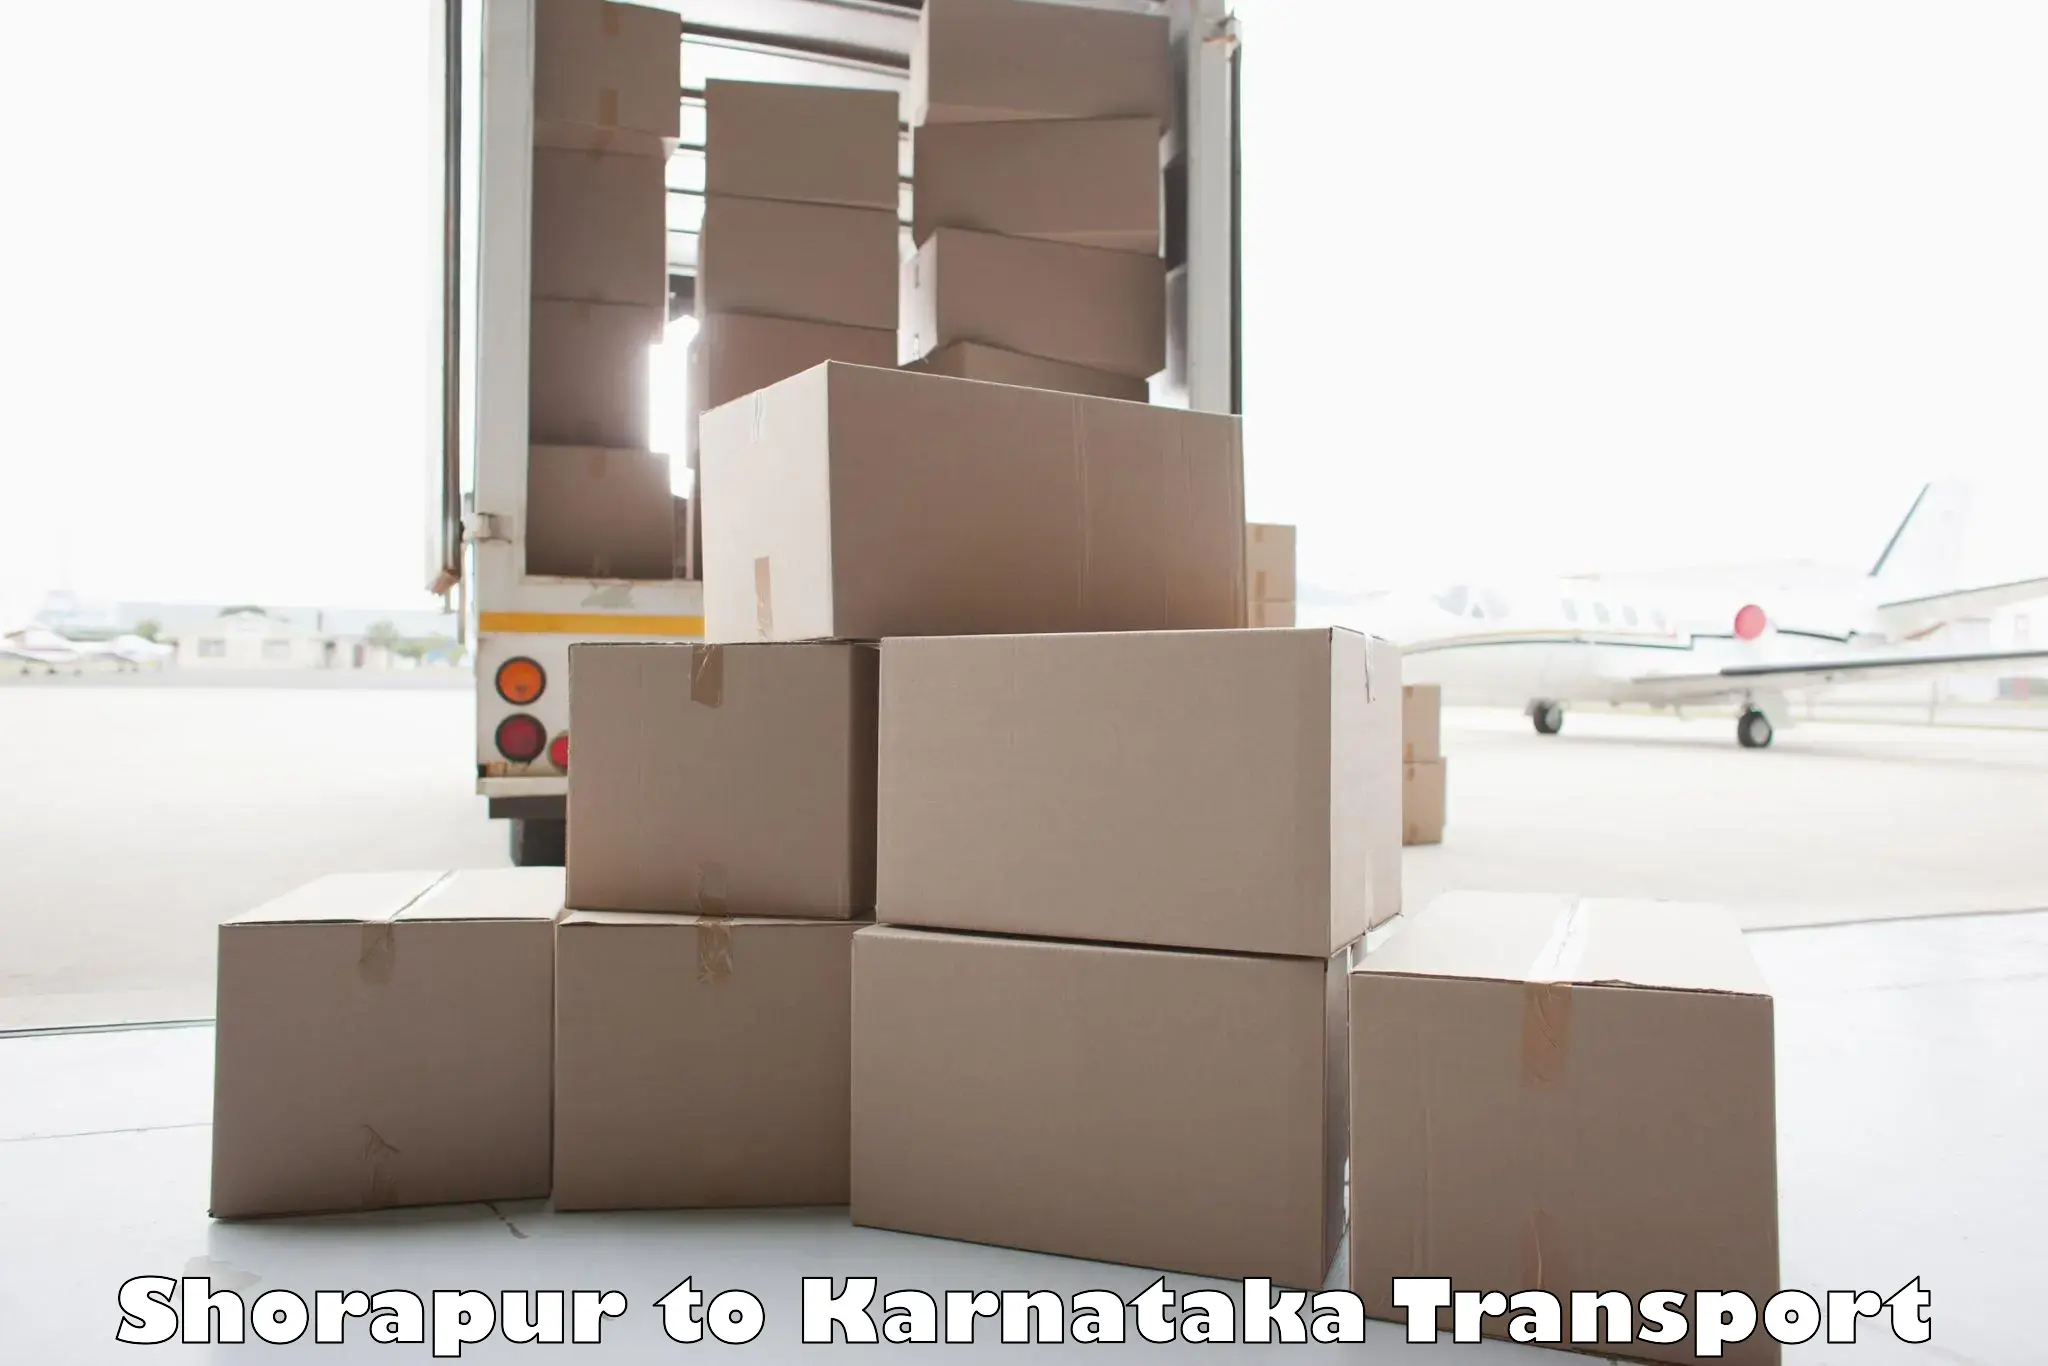 Truck transport companies in India Shorapur to Chincholi